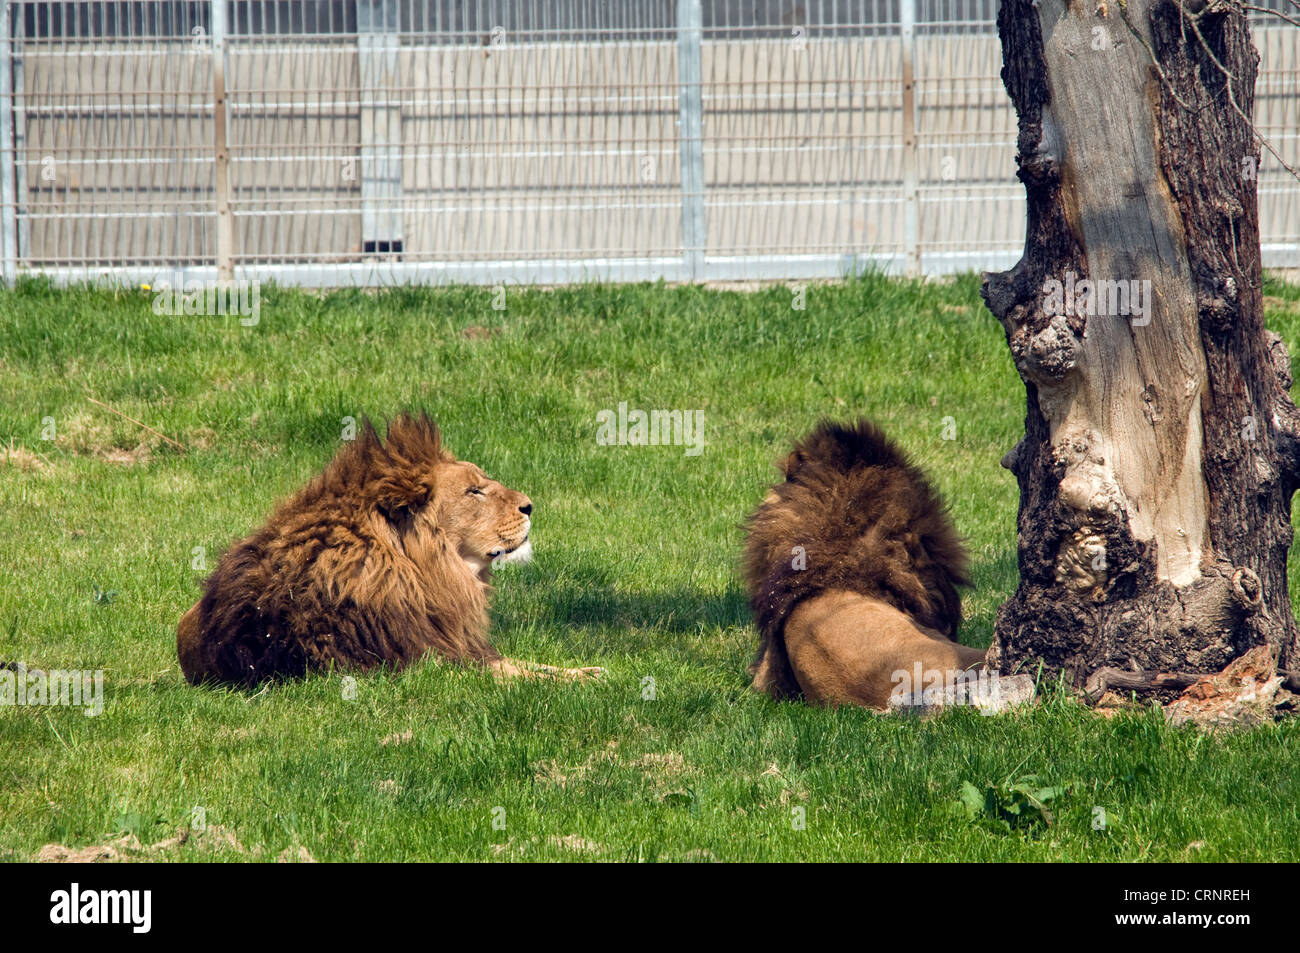 Lions fenced off Stock Photo